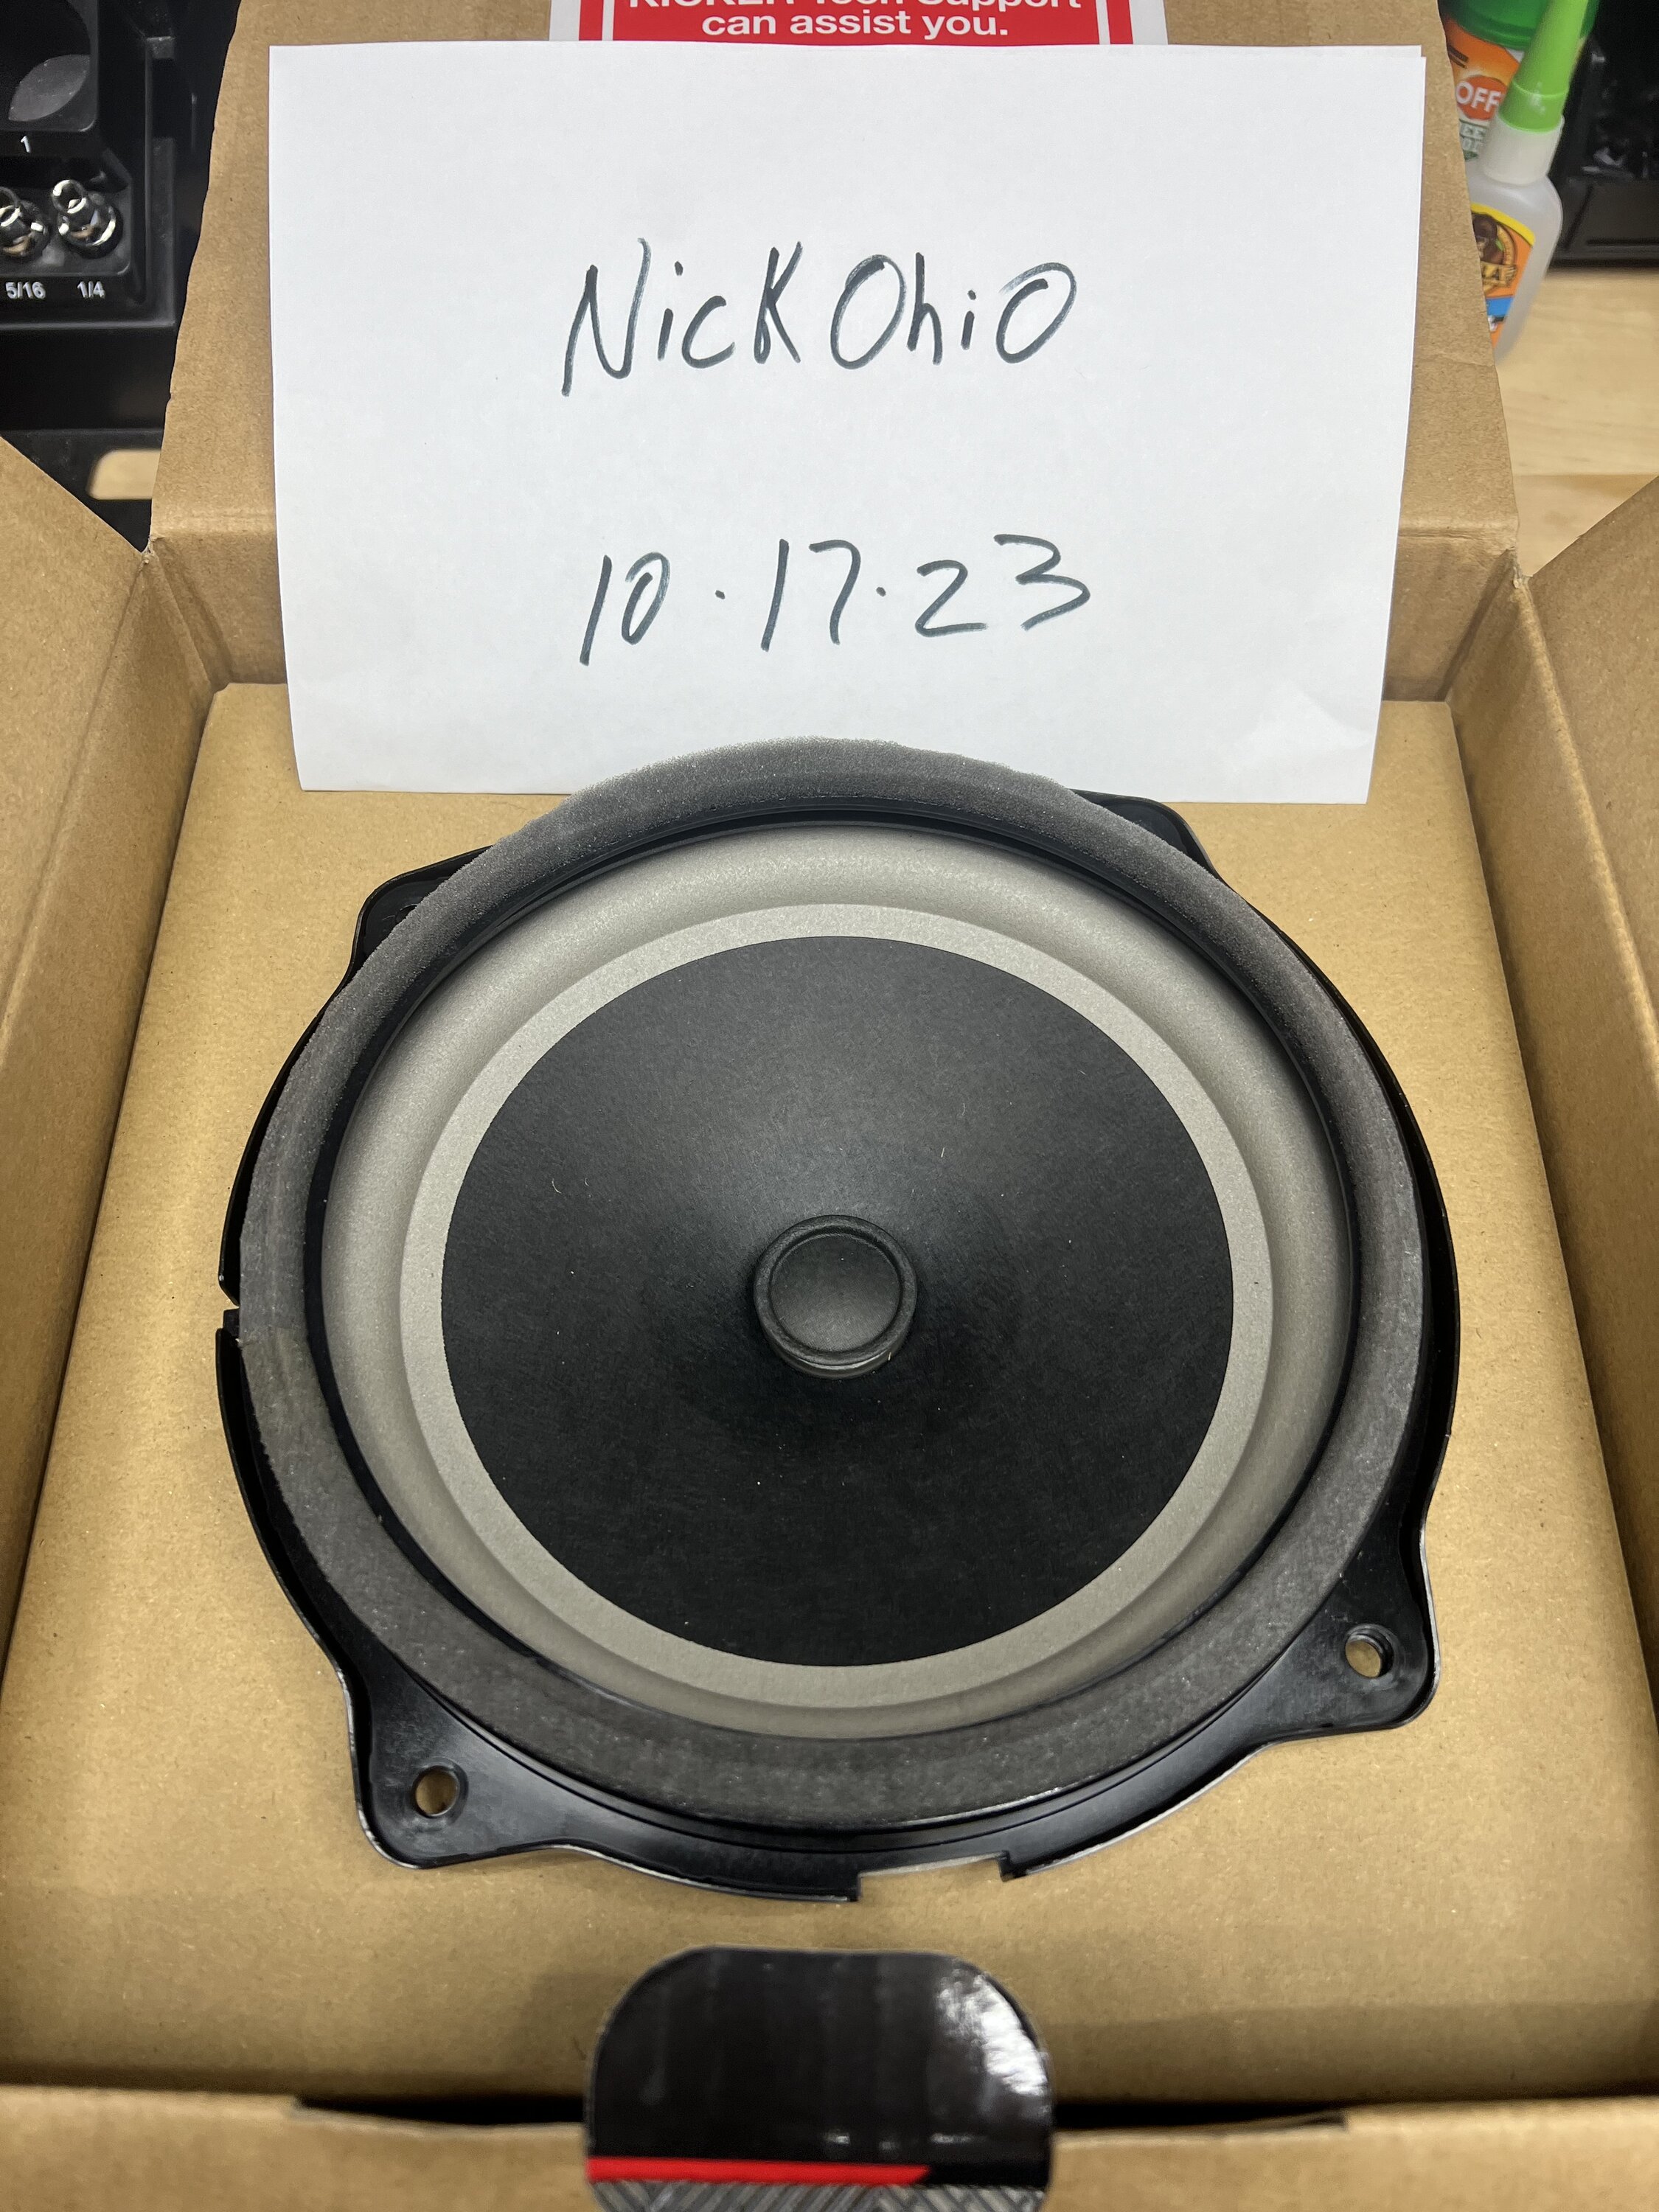 Ford Bronco B&O Speakers, barely used - $50 for all tempImagefnJqMa